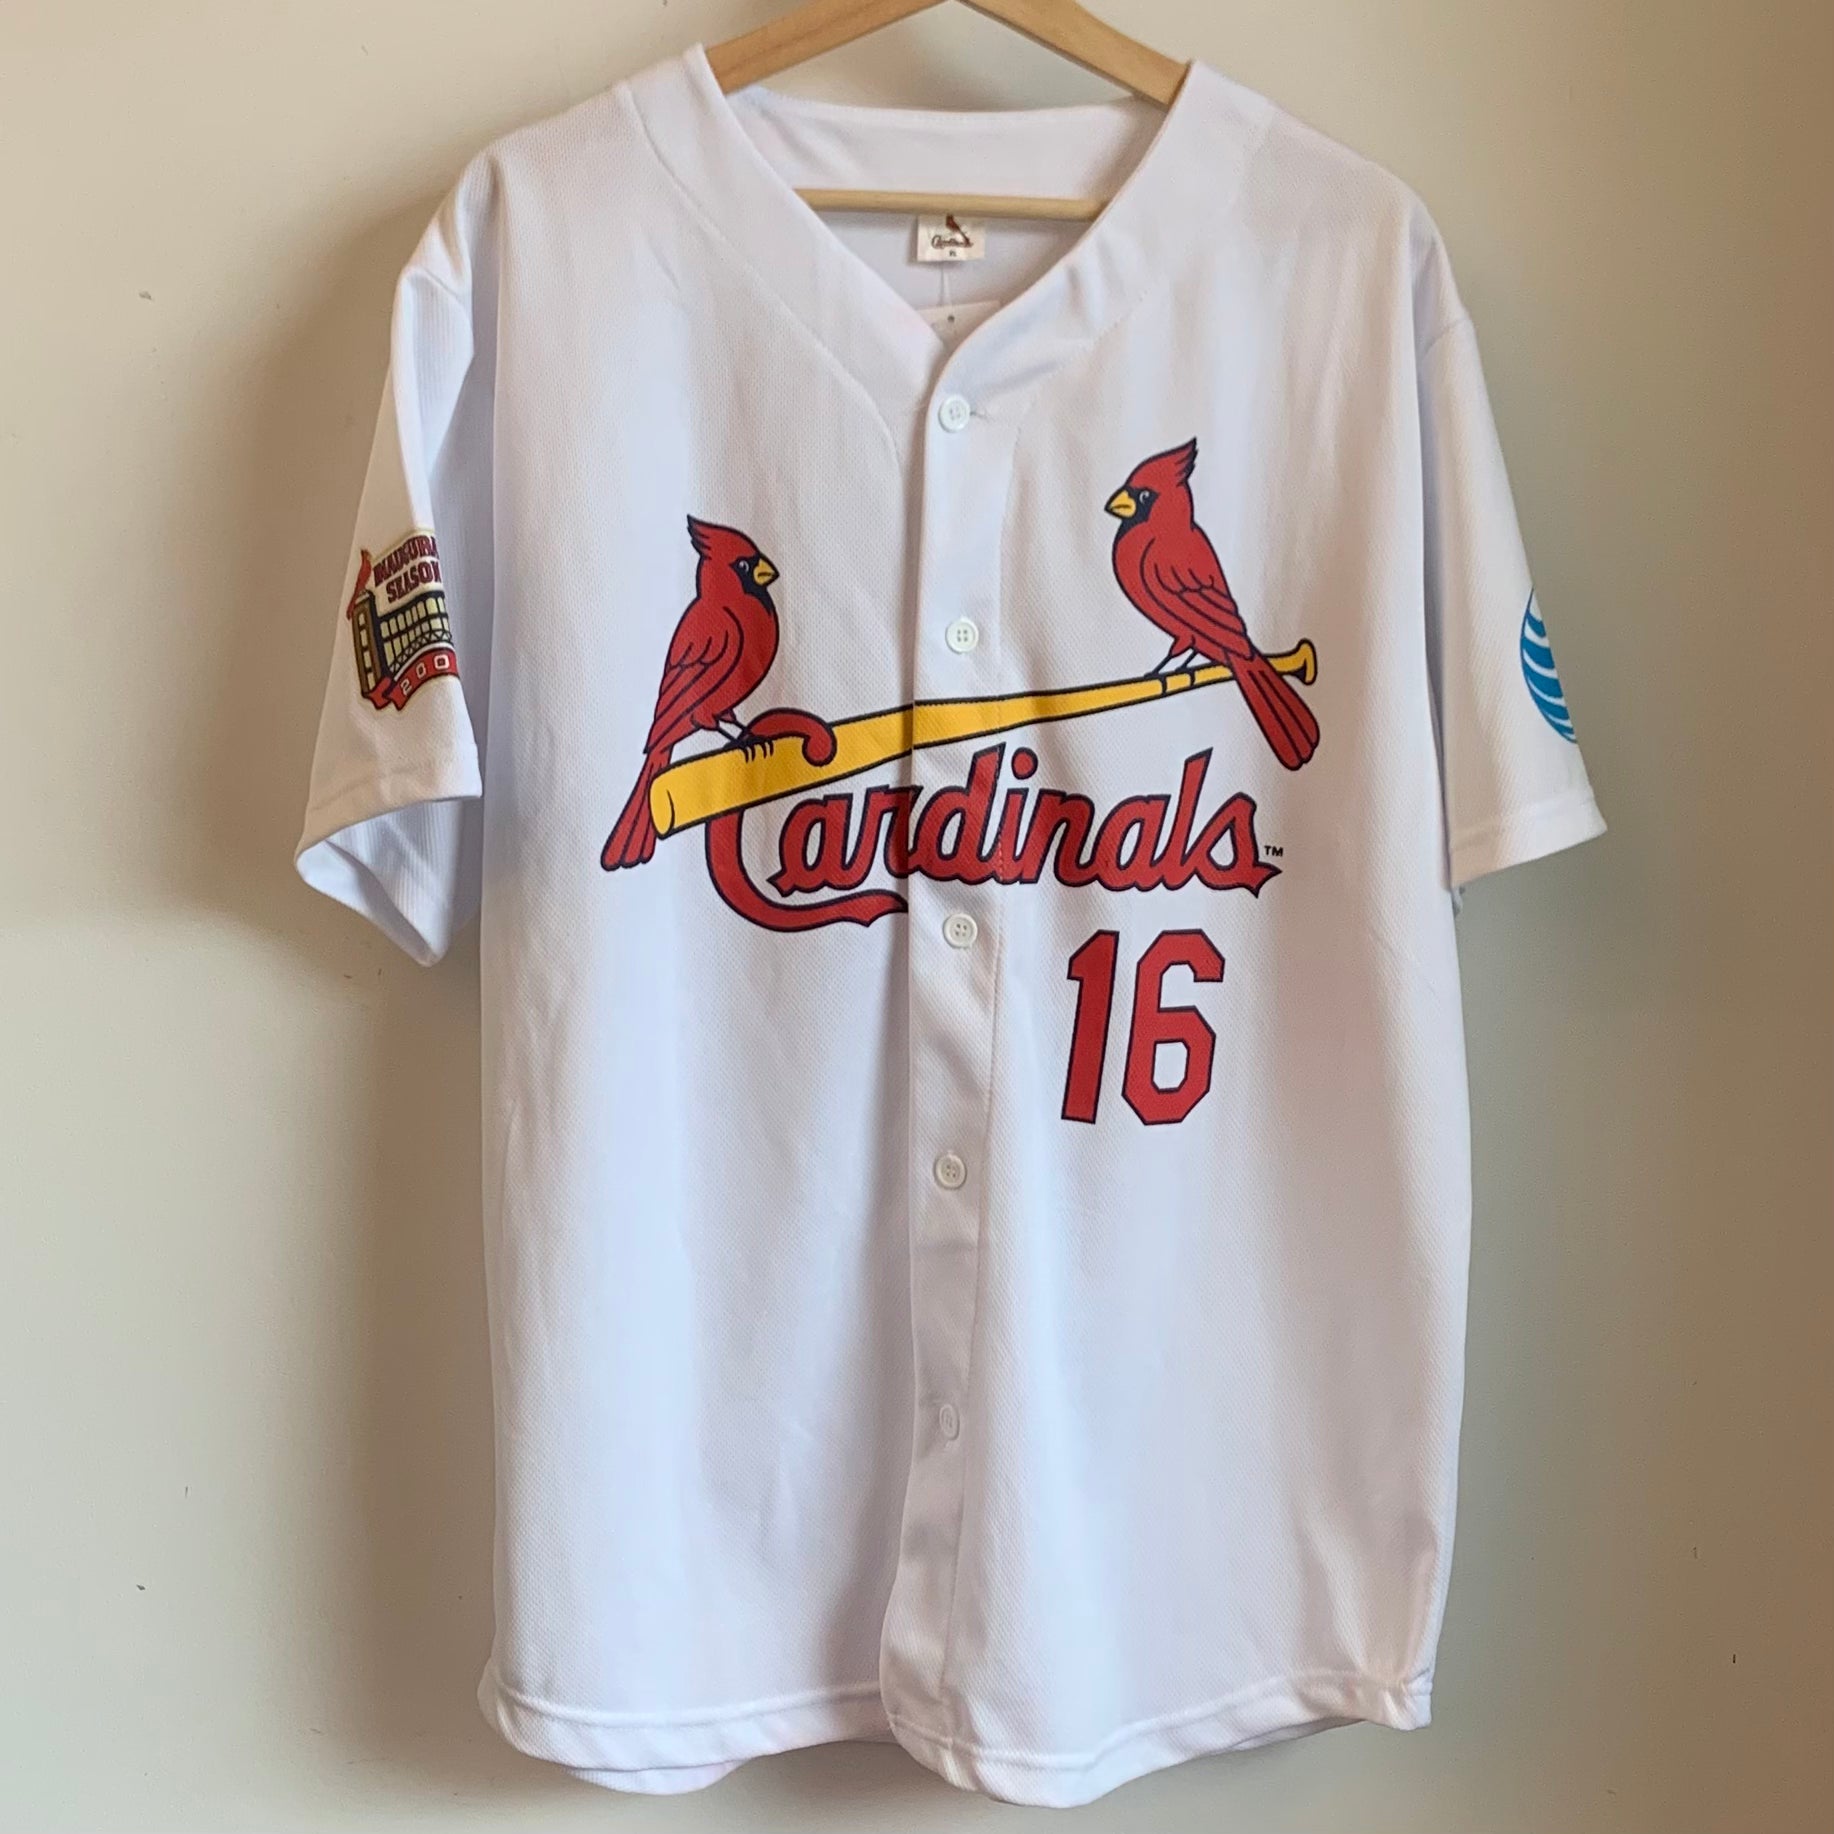 St. Louis Cardinals adding retro jersey for Saturday home games